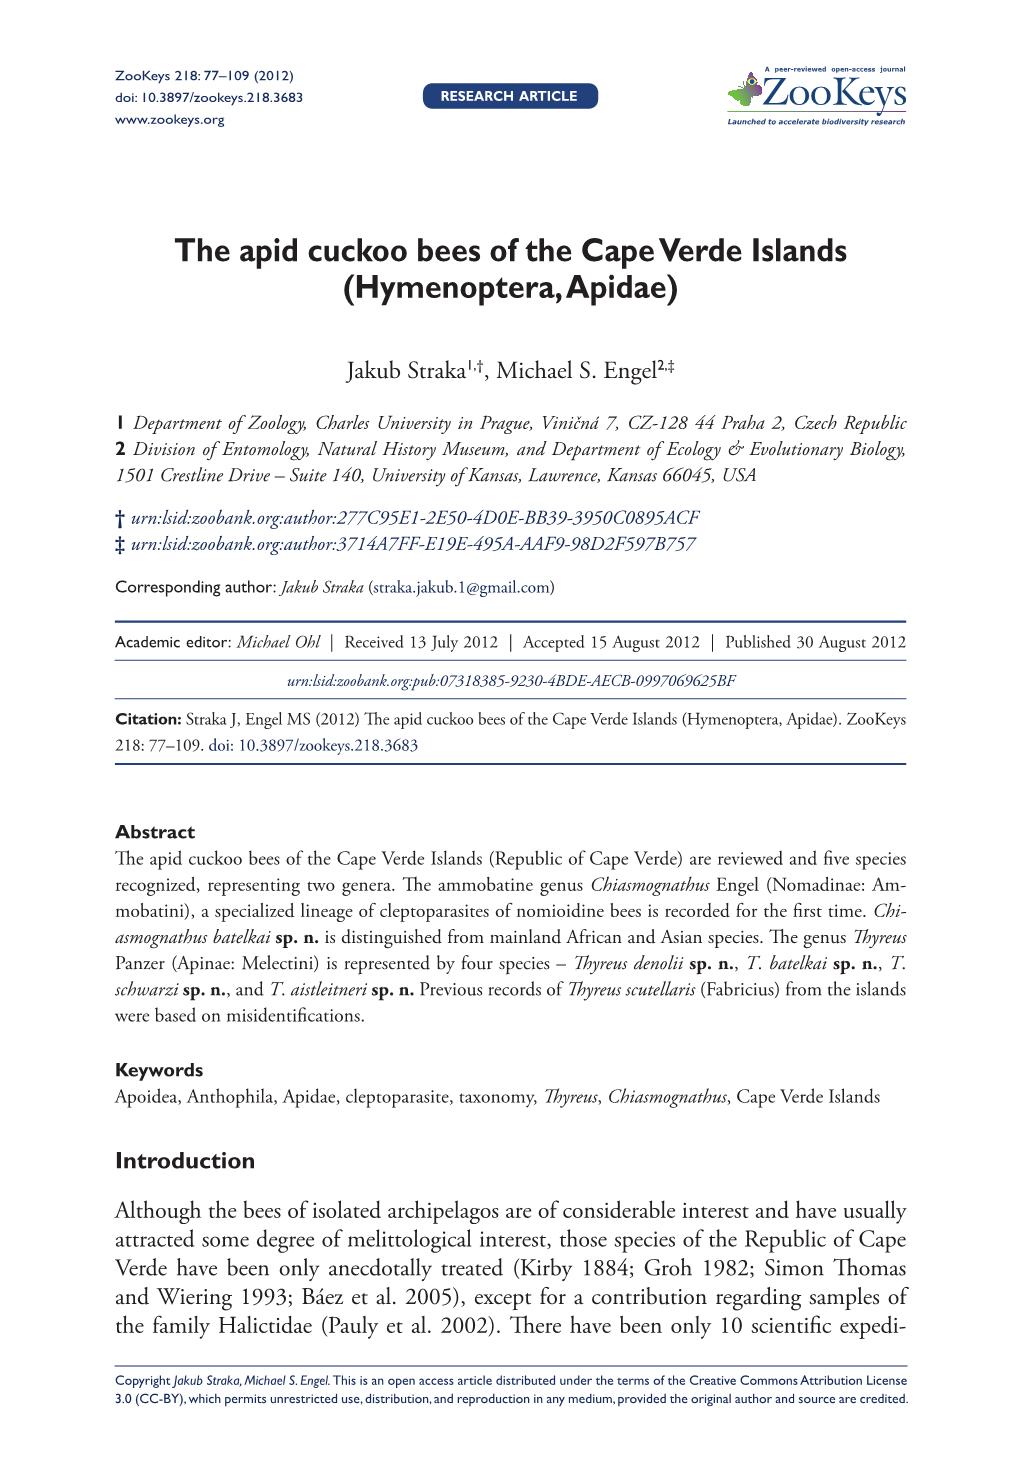 Hymenoptera, Apidae) 77 Doi: 10.3897/Zookeys.218.3683 Research Article Launched to Accelerate Biodiversity Research